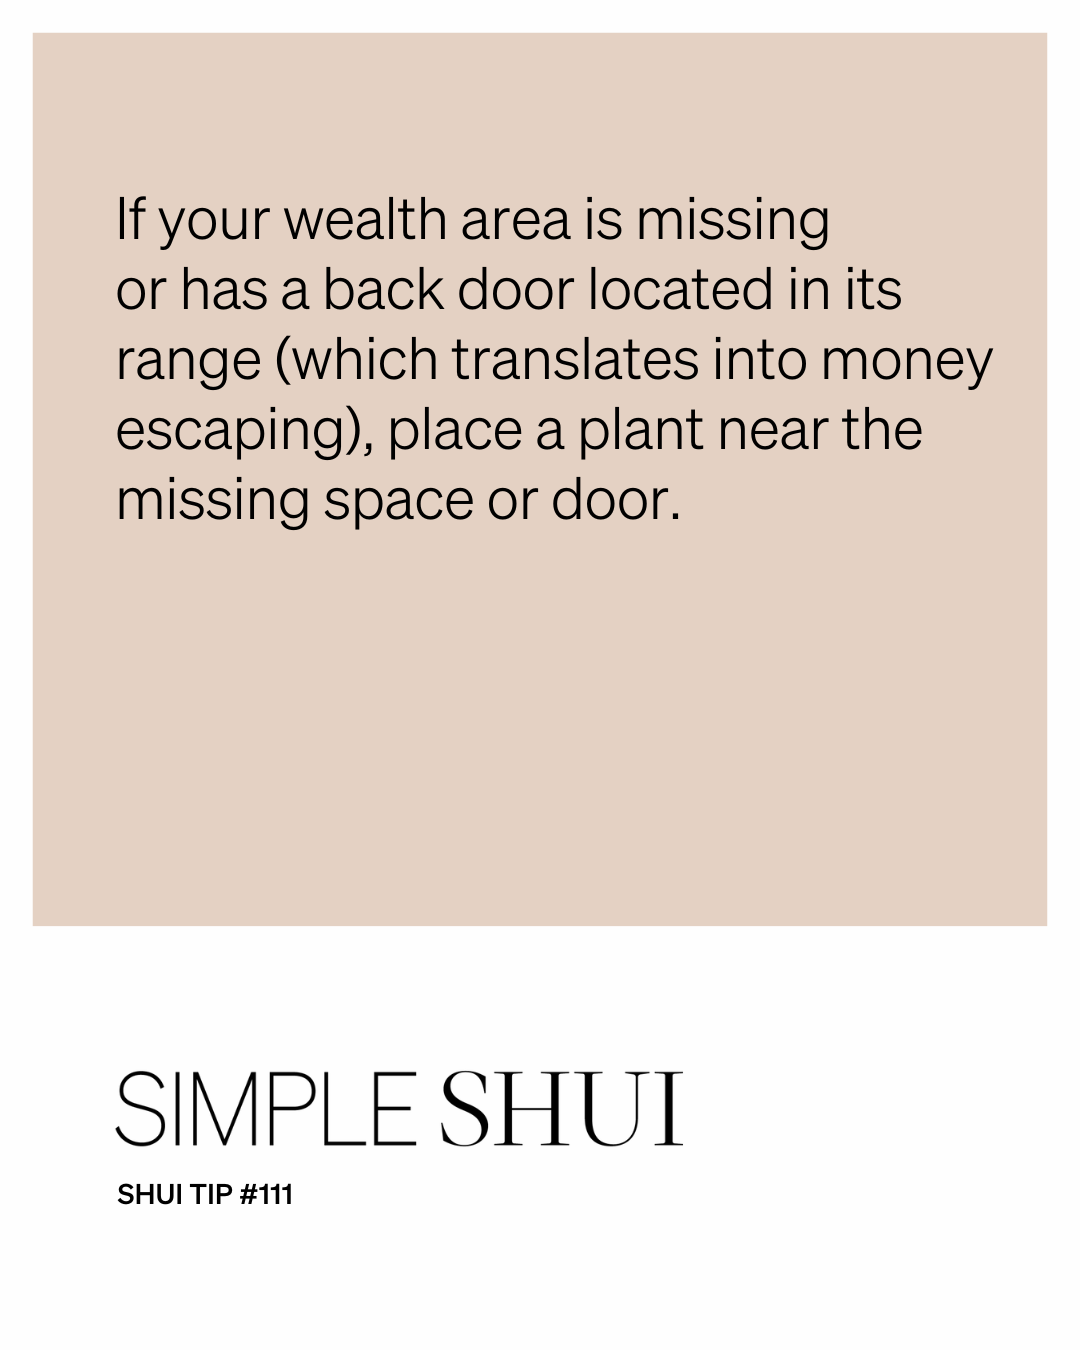 simple shui tip: work your wealth magic